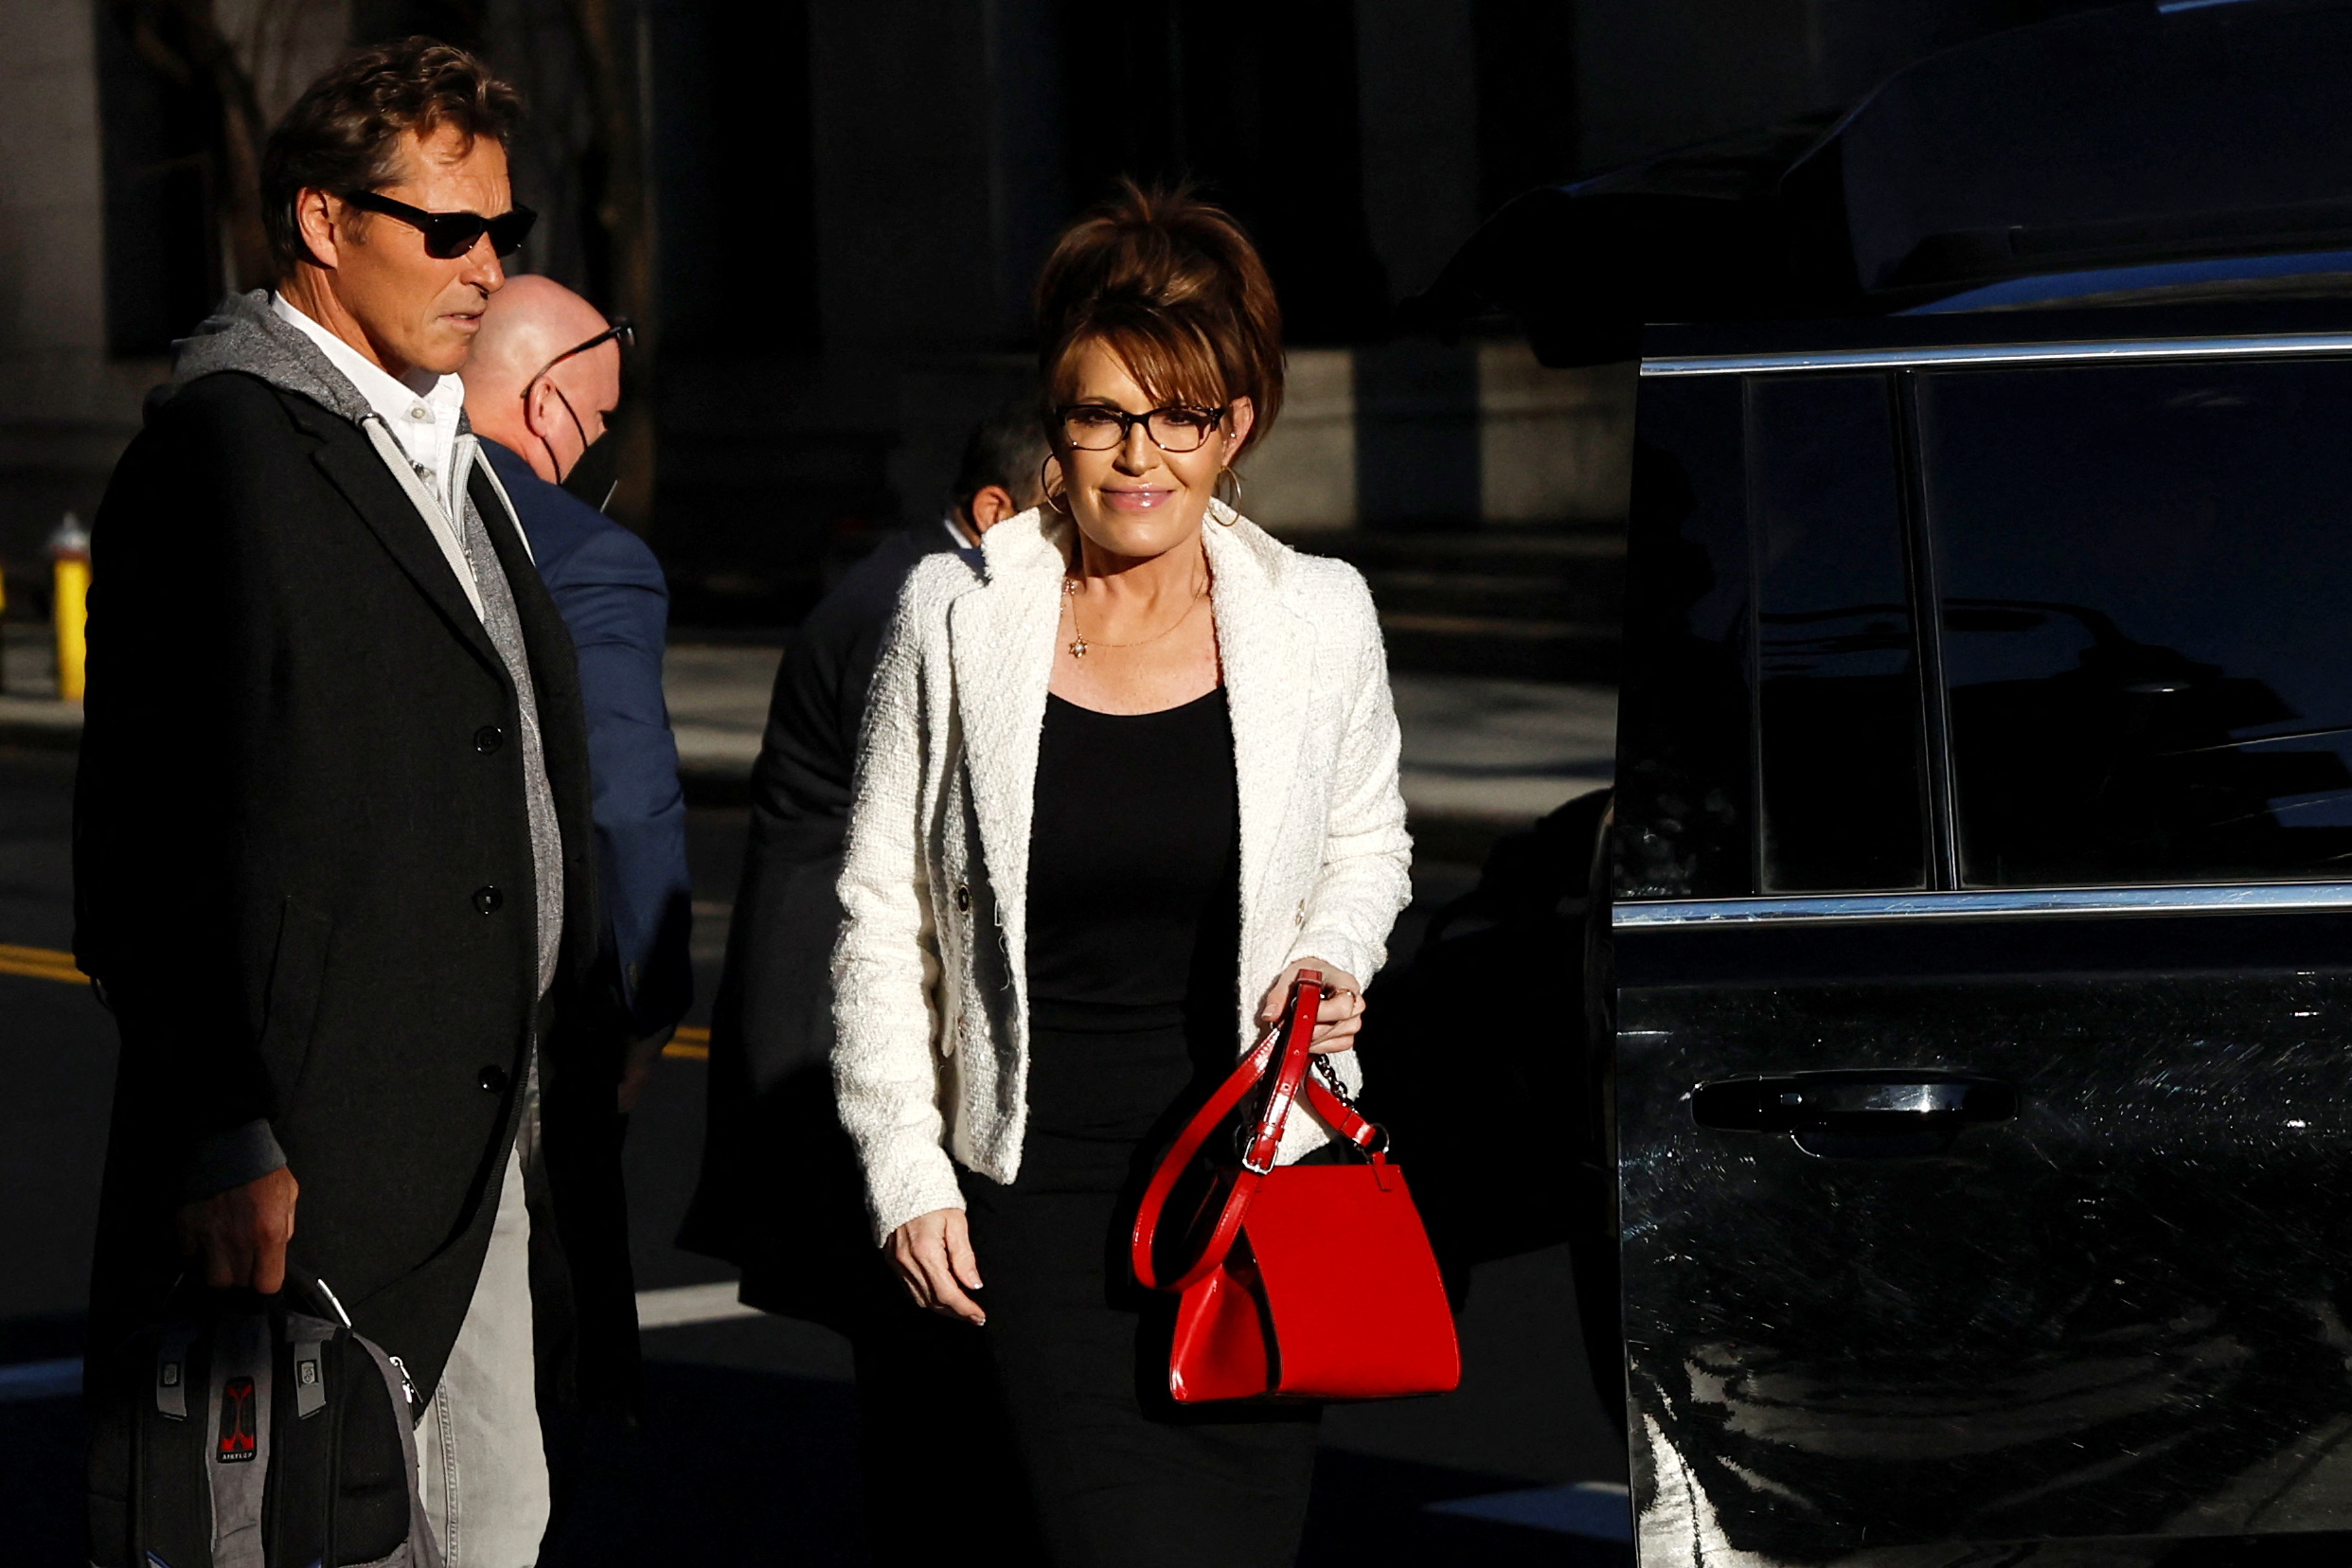 Sarah Palin's defamation lawsuit against the New York Times